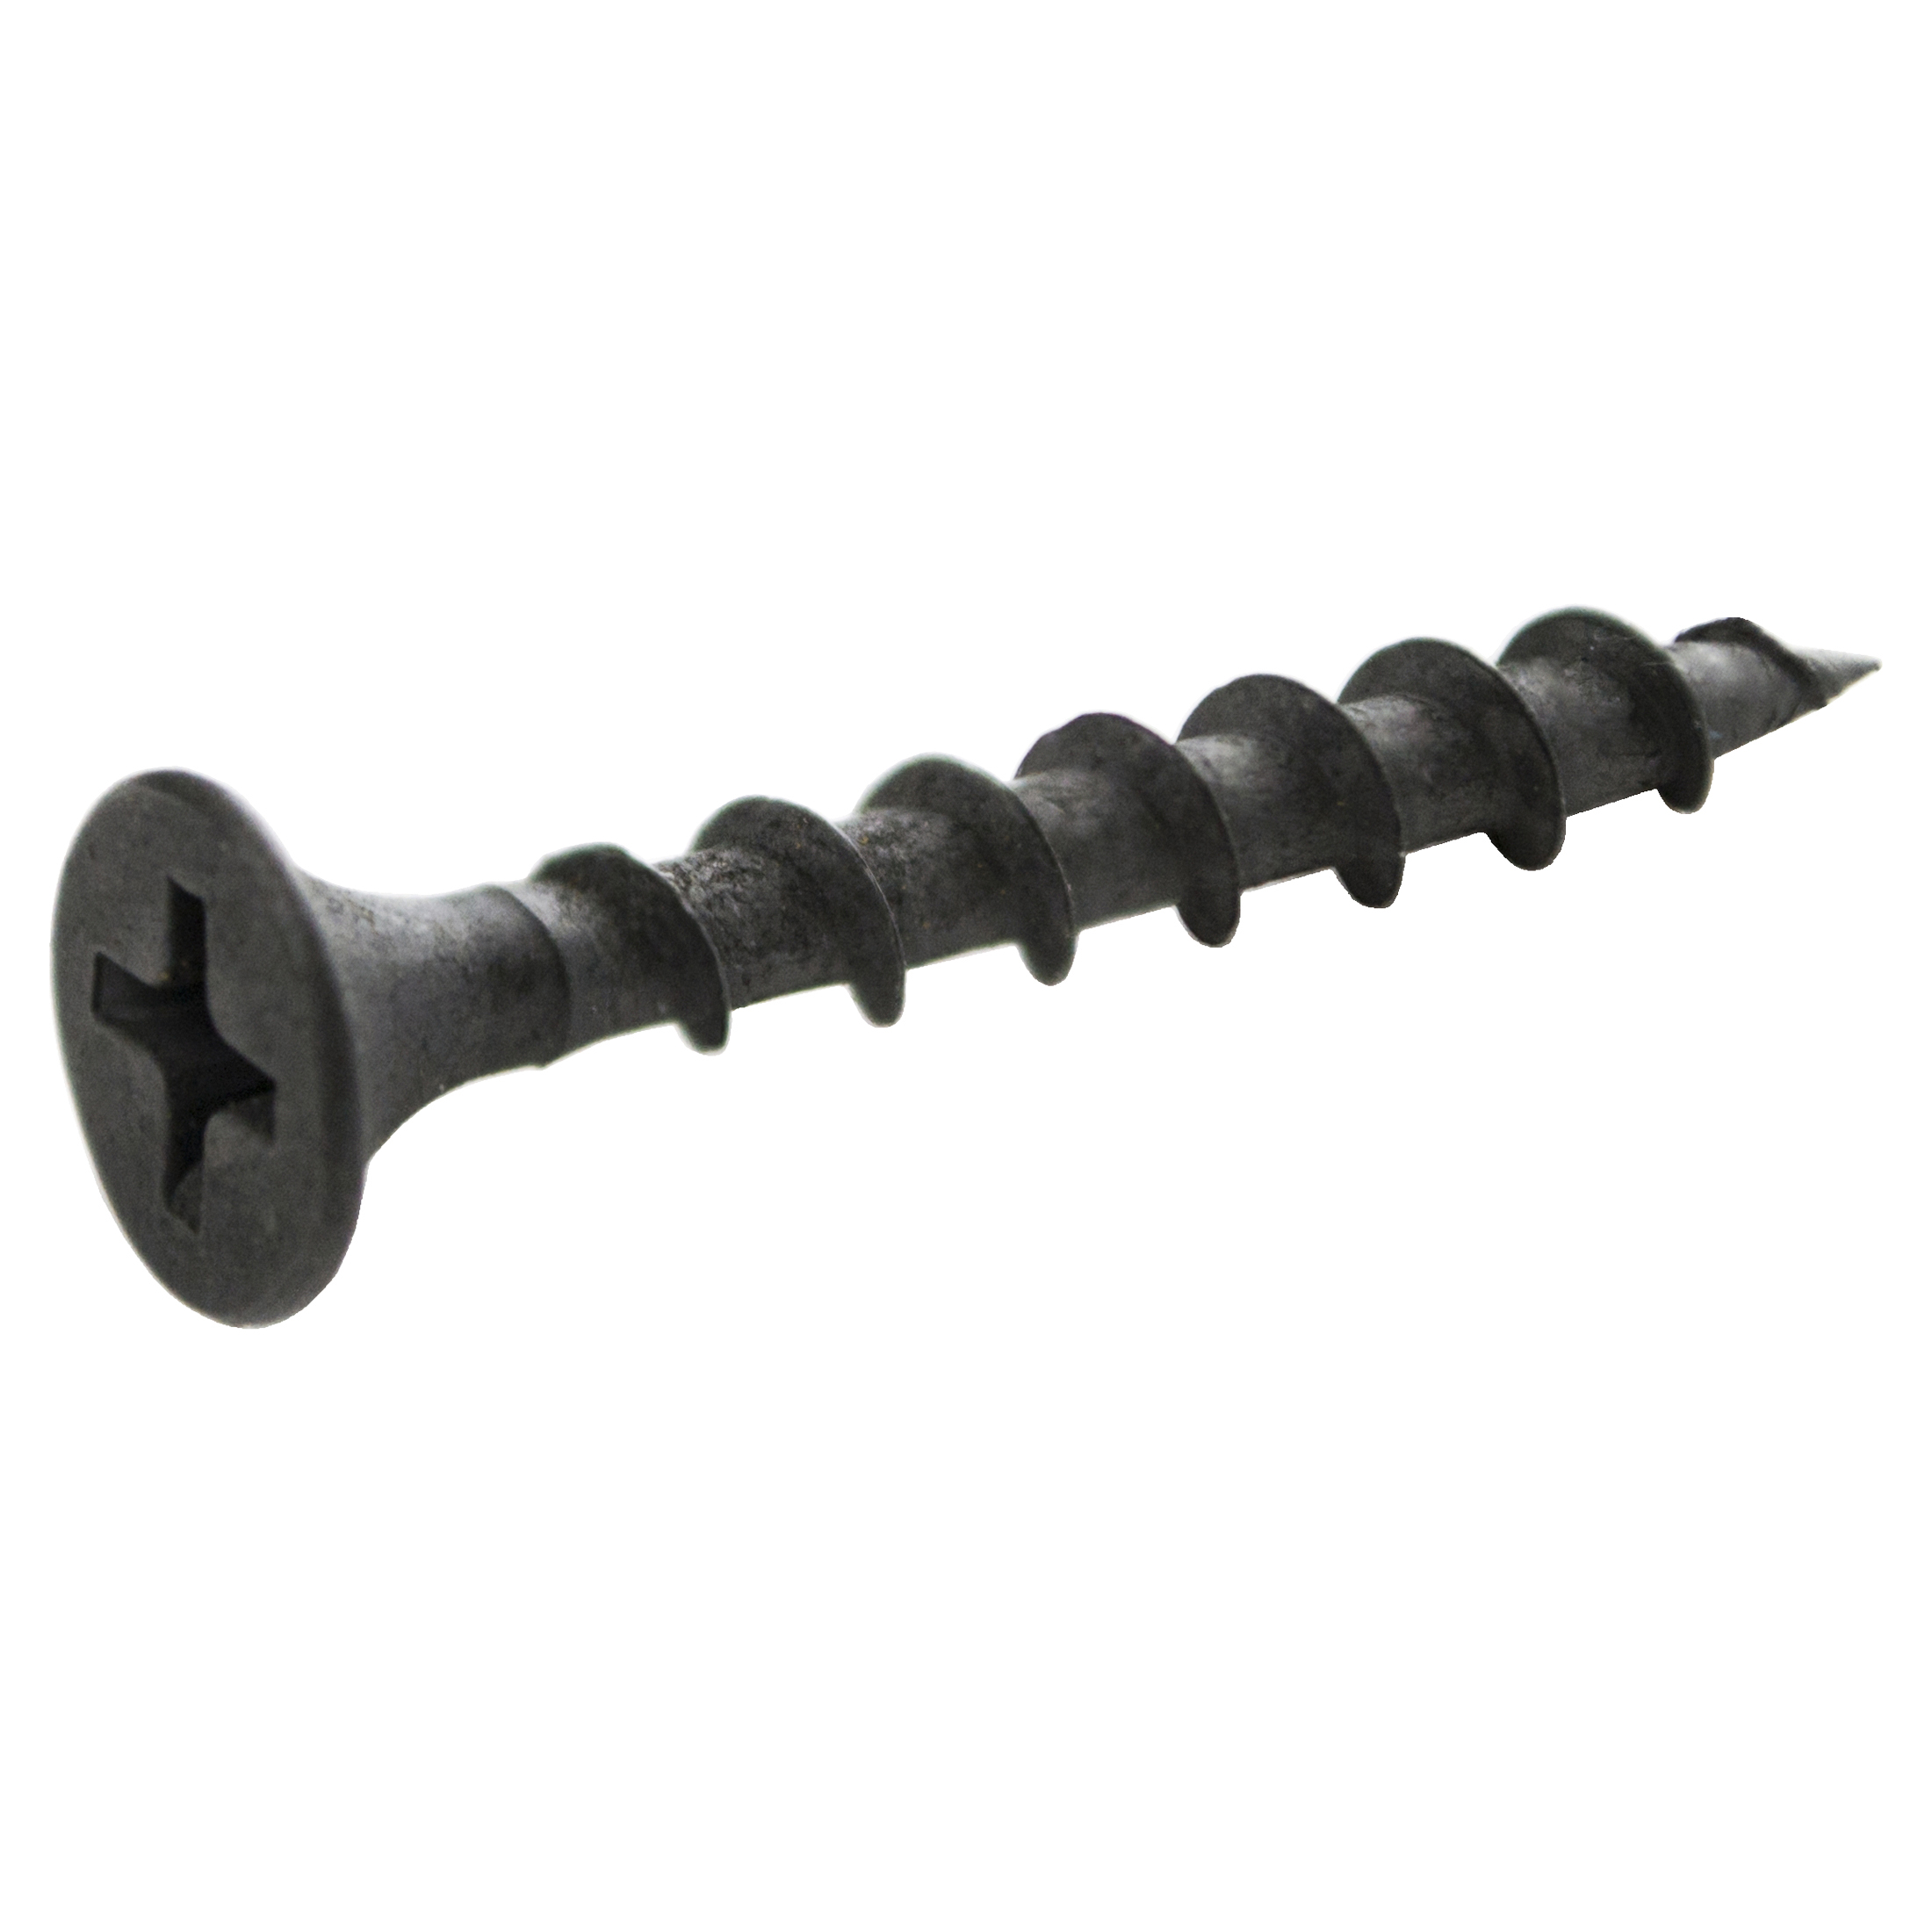 Grip-Rite #6 x 1-1/4 in. Phillips Bugle-Head Coarse Thread Sharp Point Drywall to Wood Screw 1lb. - image 2 of 8